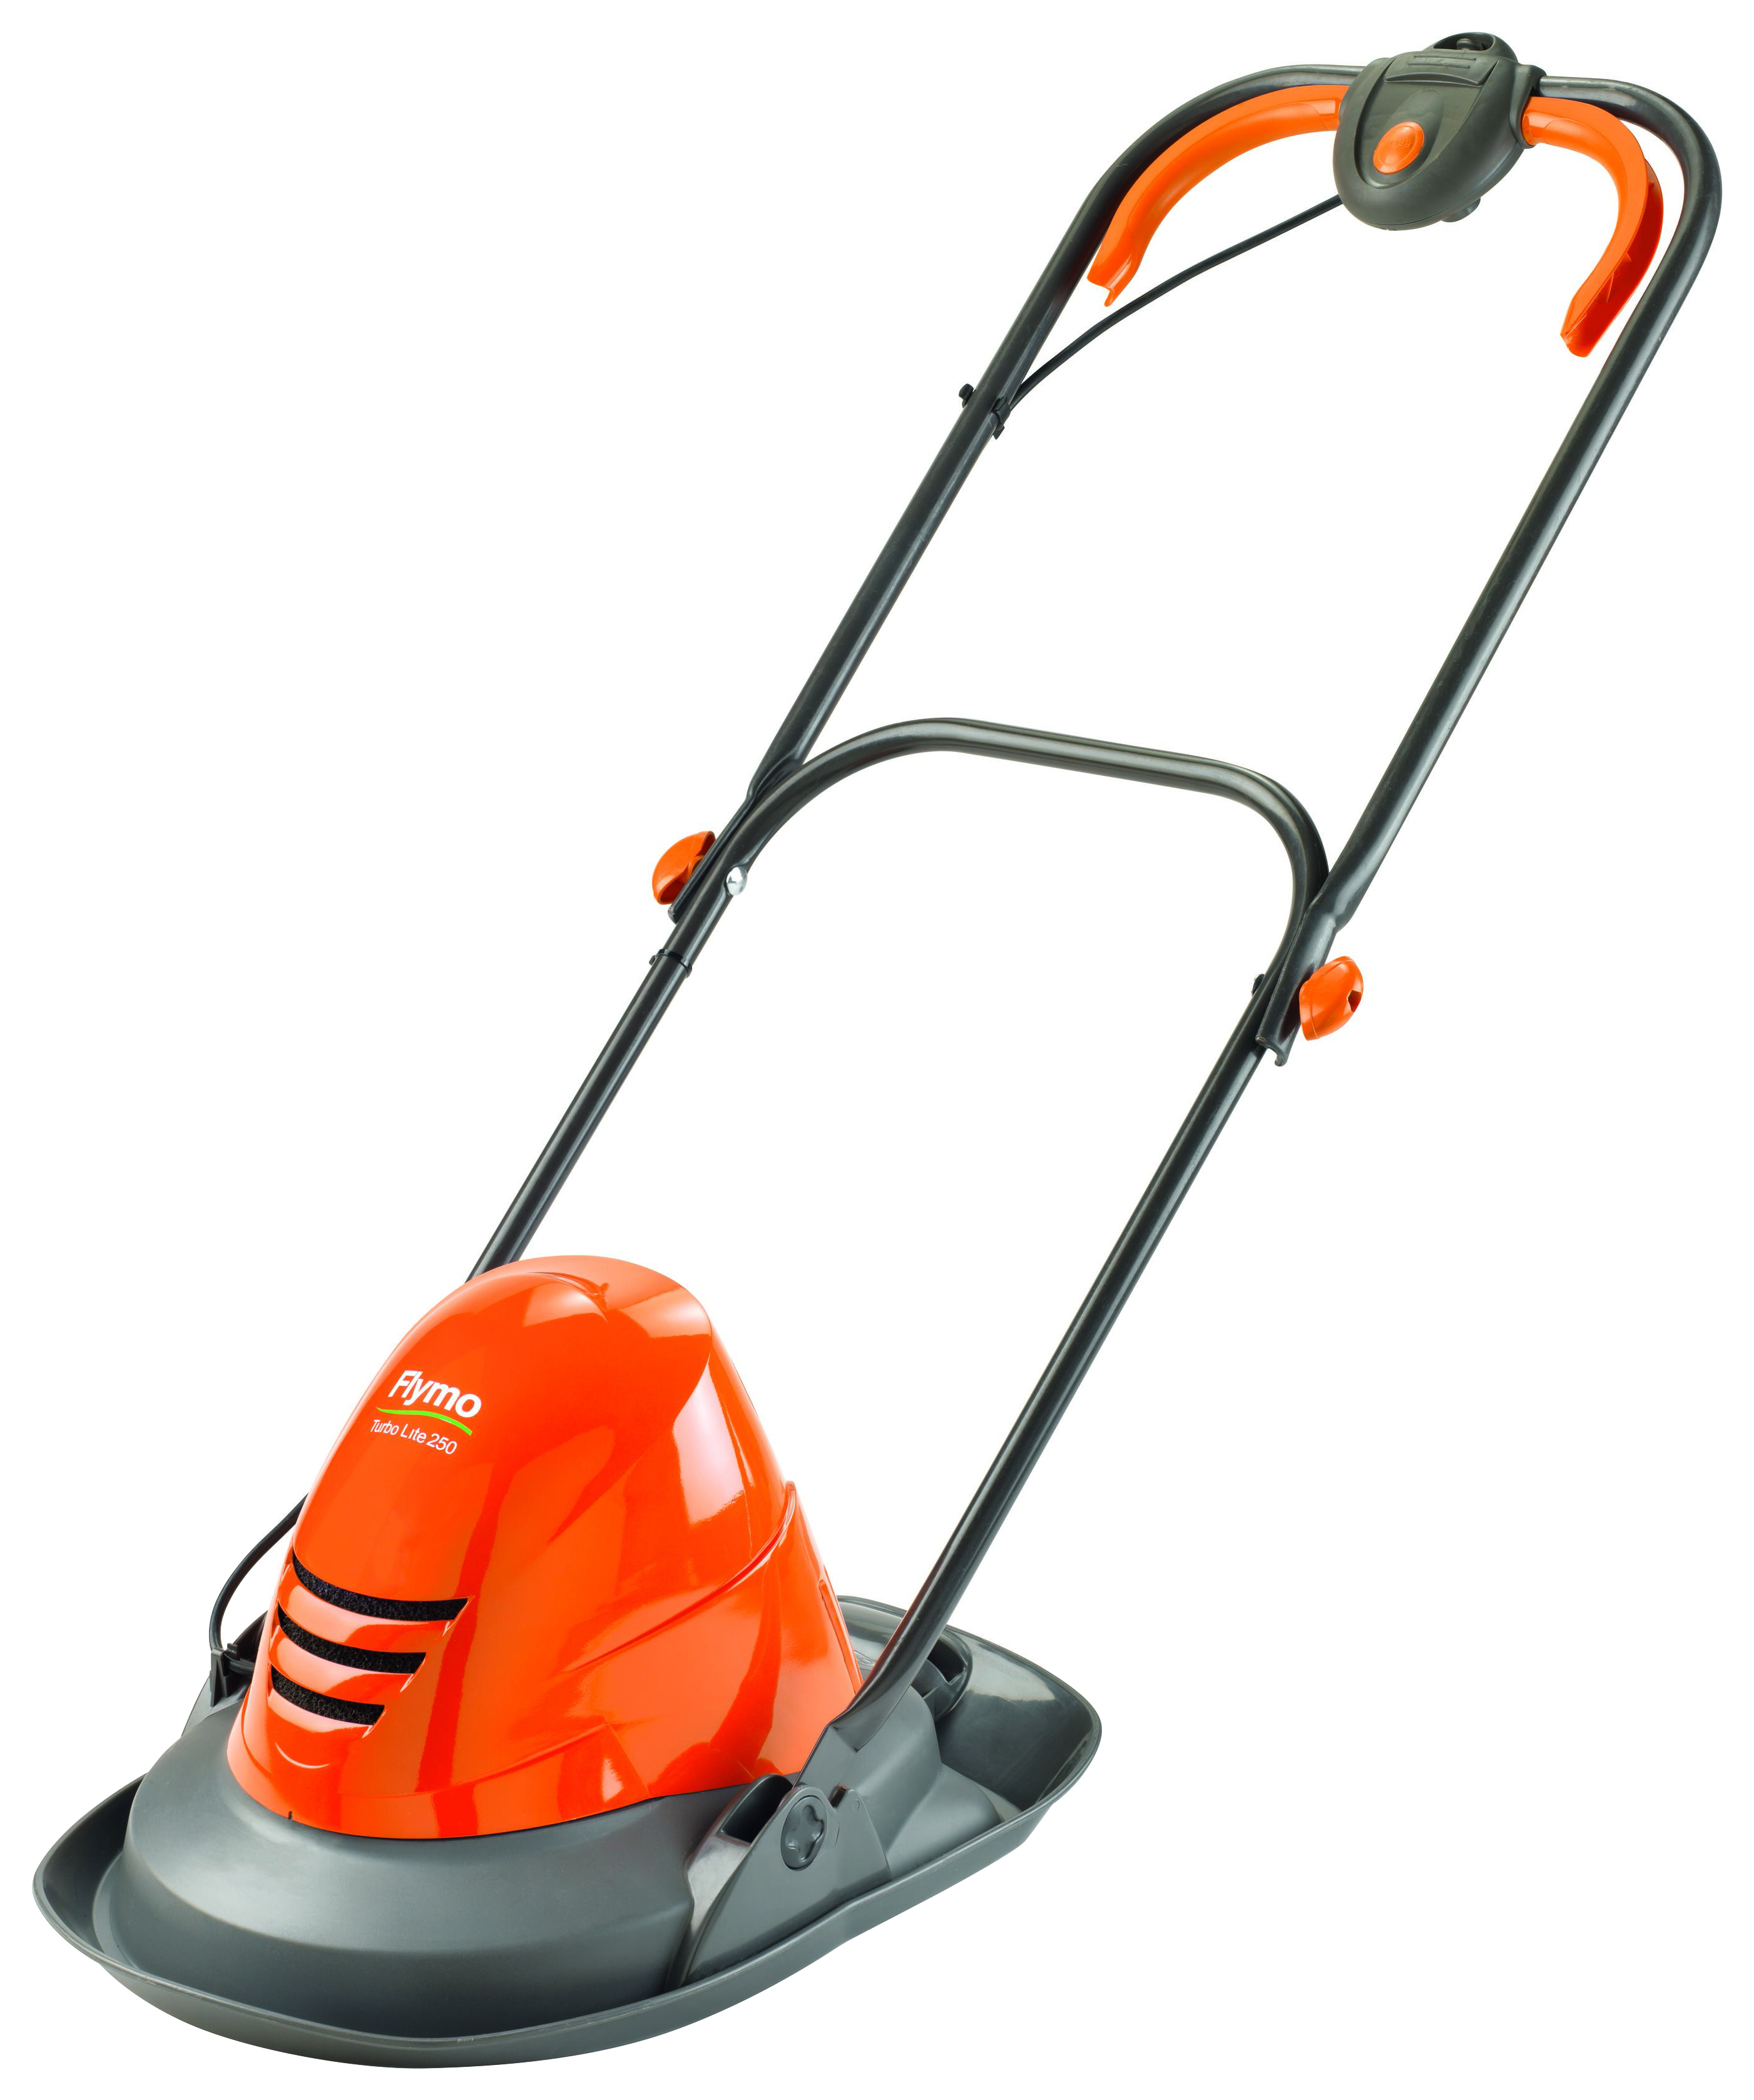 Flymo Turbo Lite 250 Corded Hover Lawnmower - 1400W